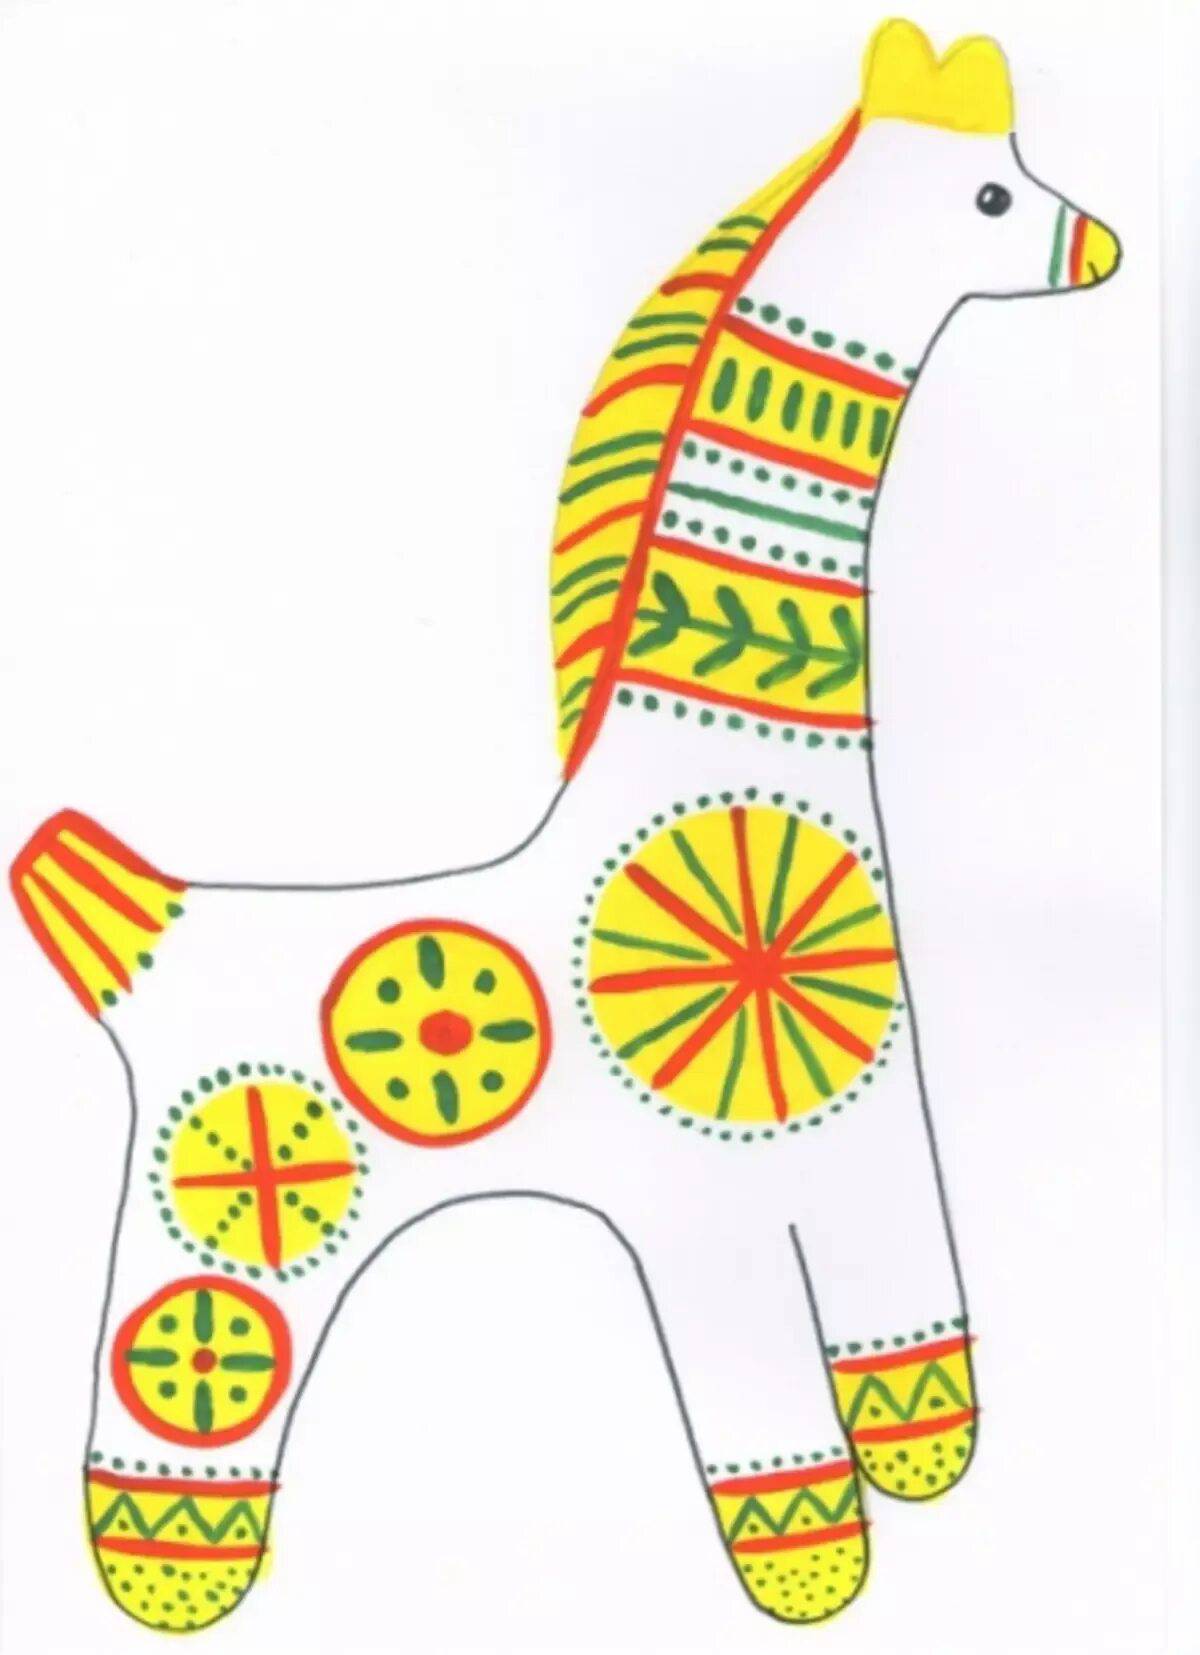 Filimonov's entertaining toy coloring book